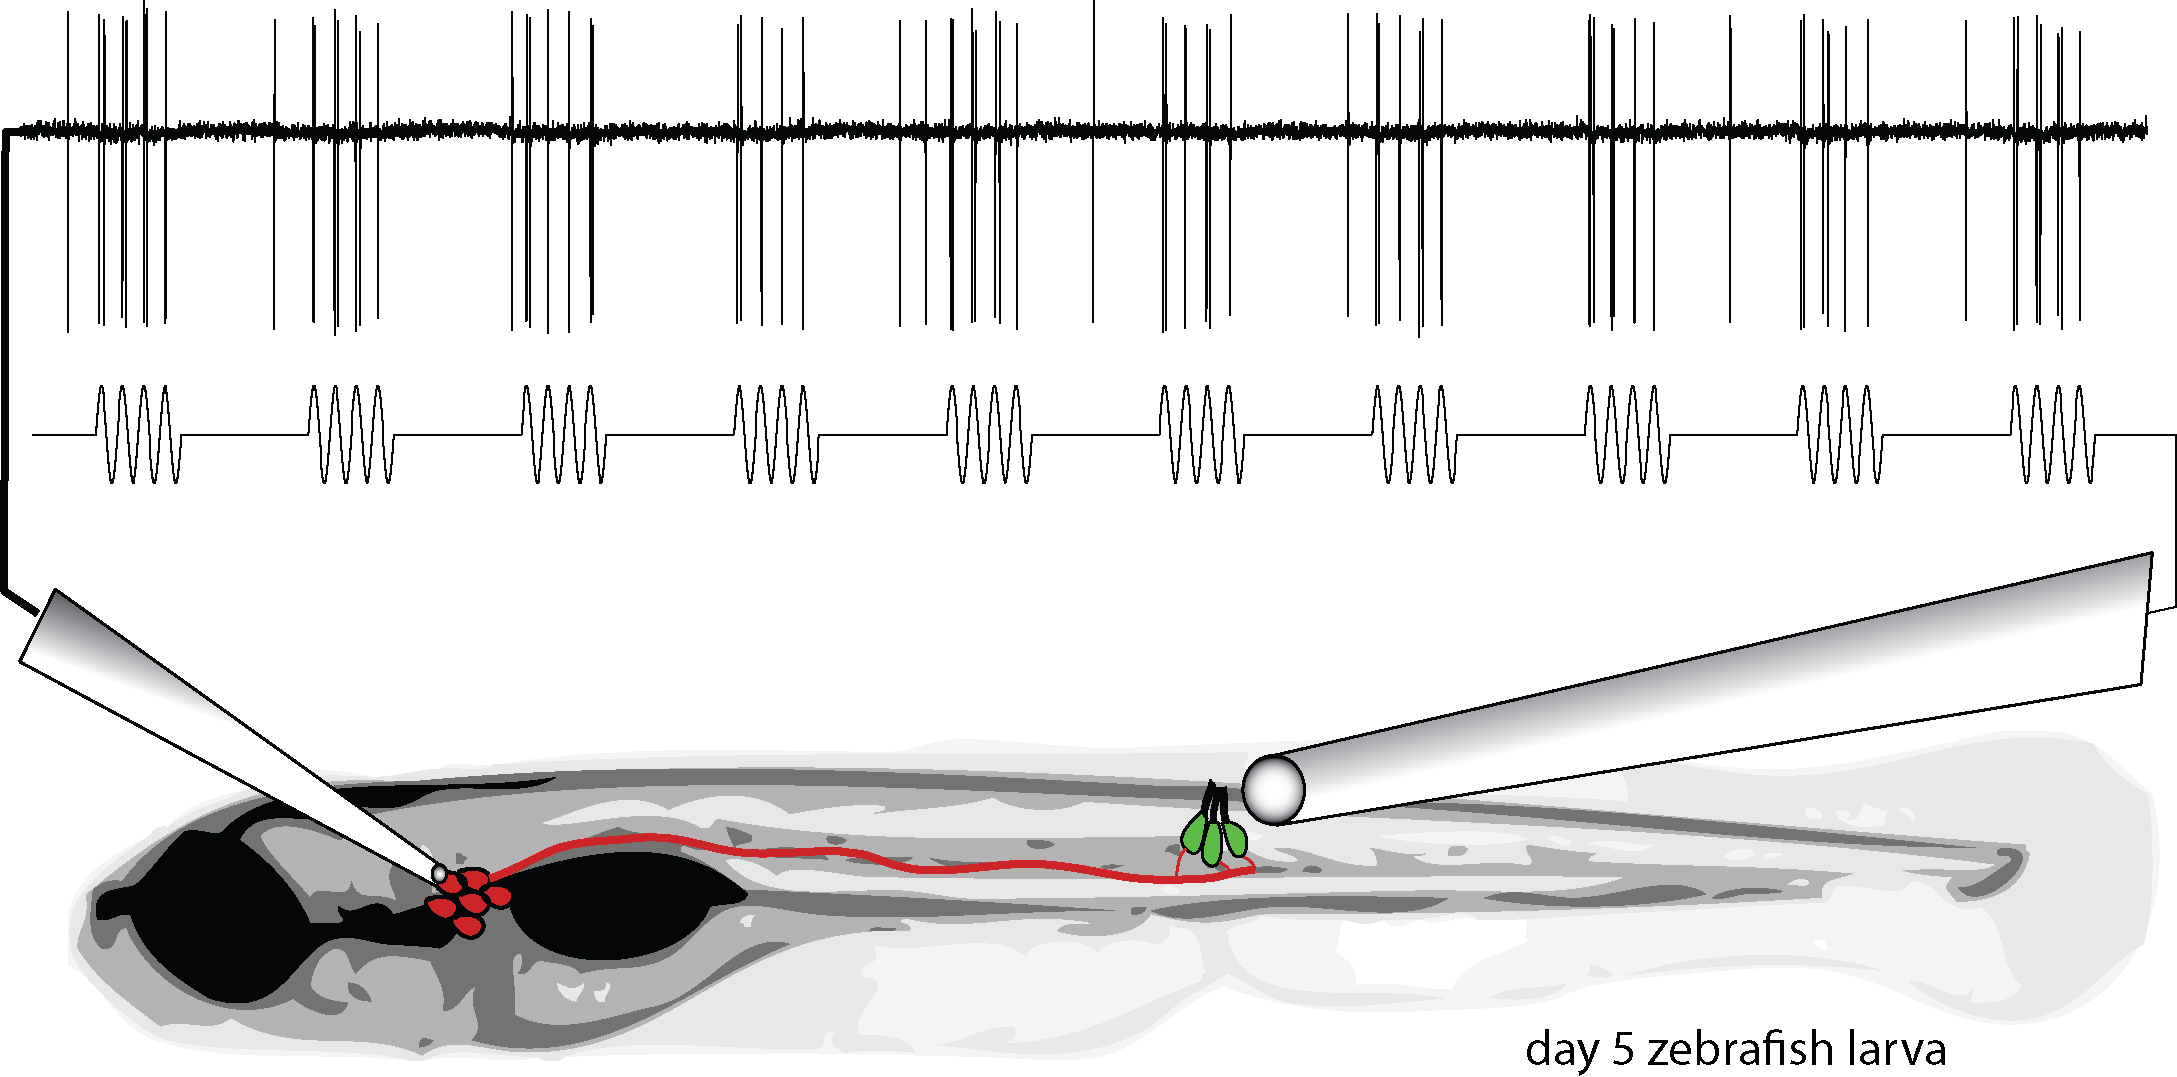 Listening In on Hair Cell Activity in the Zebrafish Lateral Line